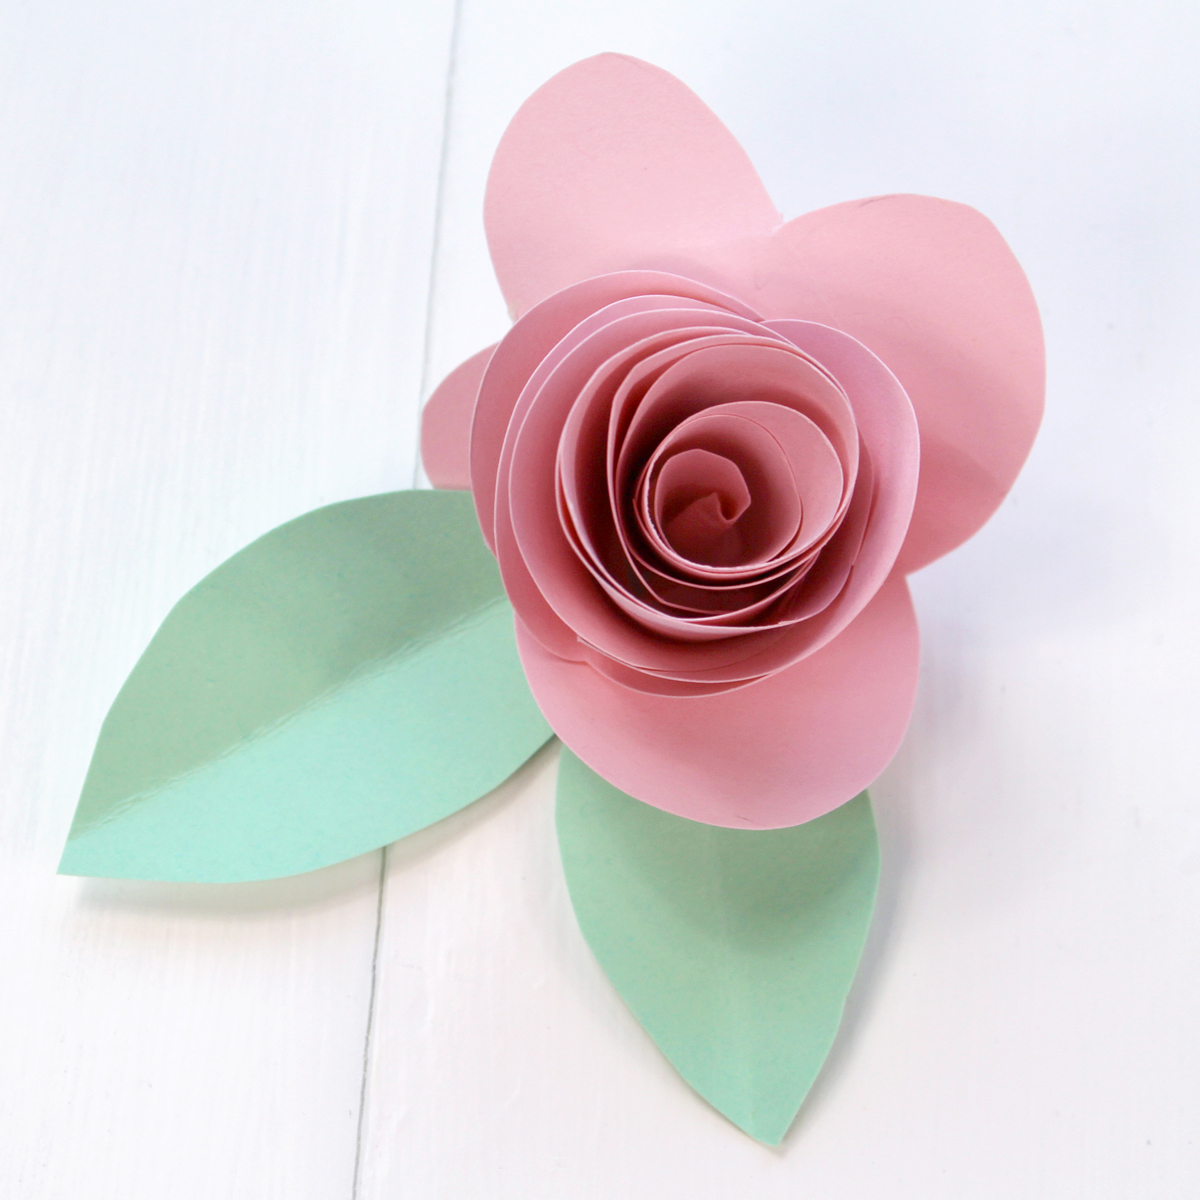 Rolled paper flowers for Spring Banner using Tombow Xtreme Adhesive